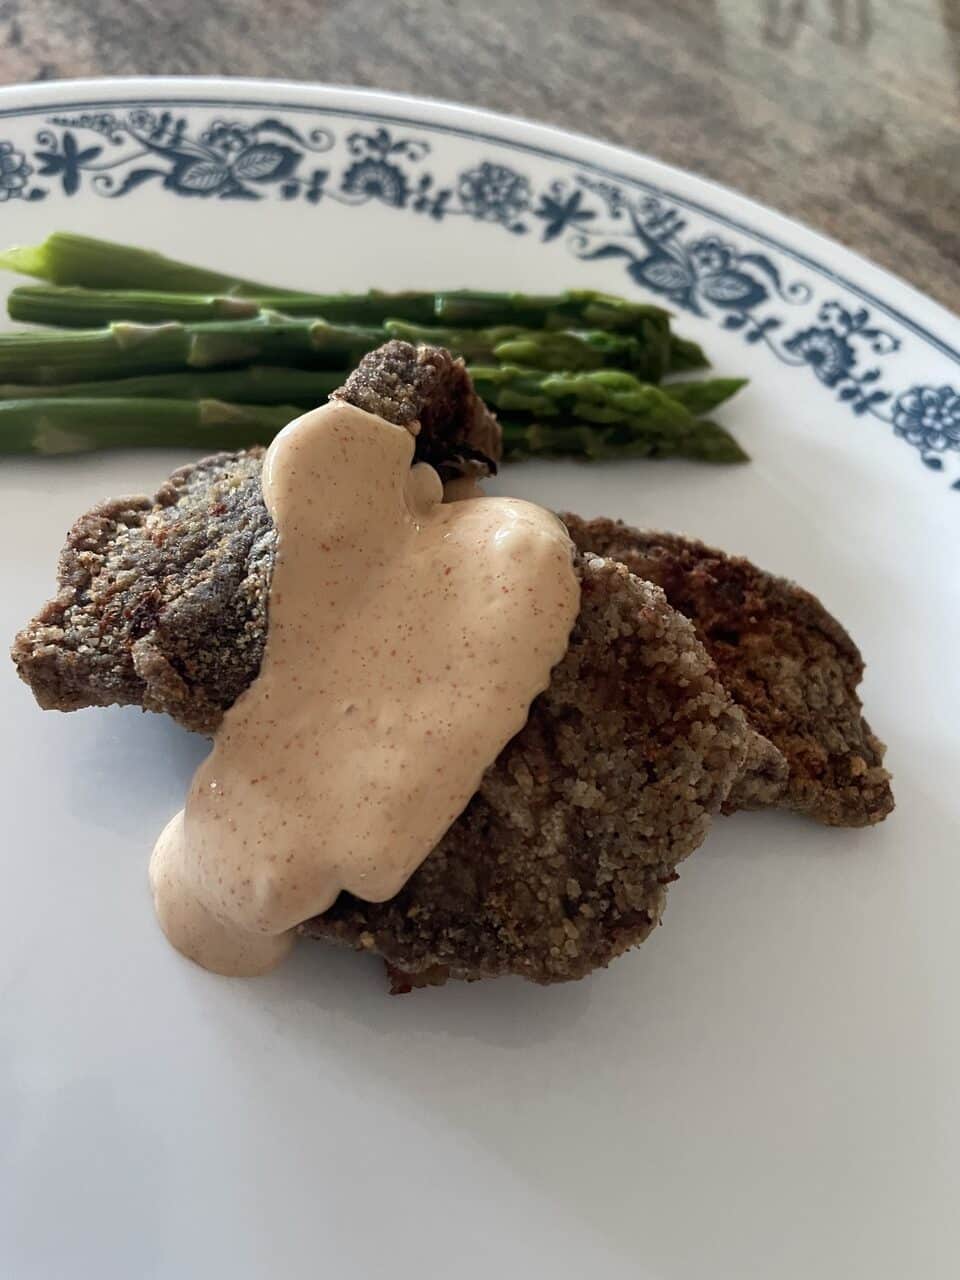 Realtree fried backstrap and remoulade